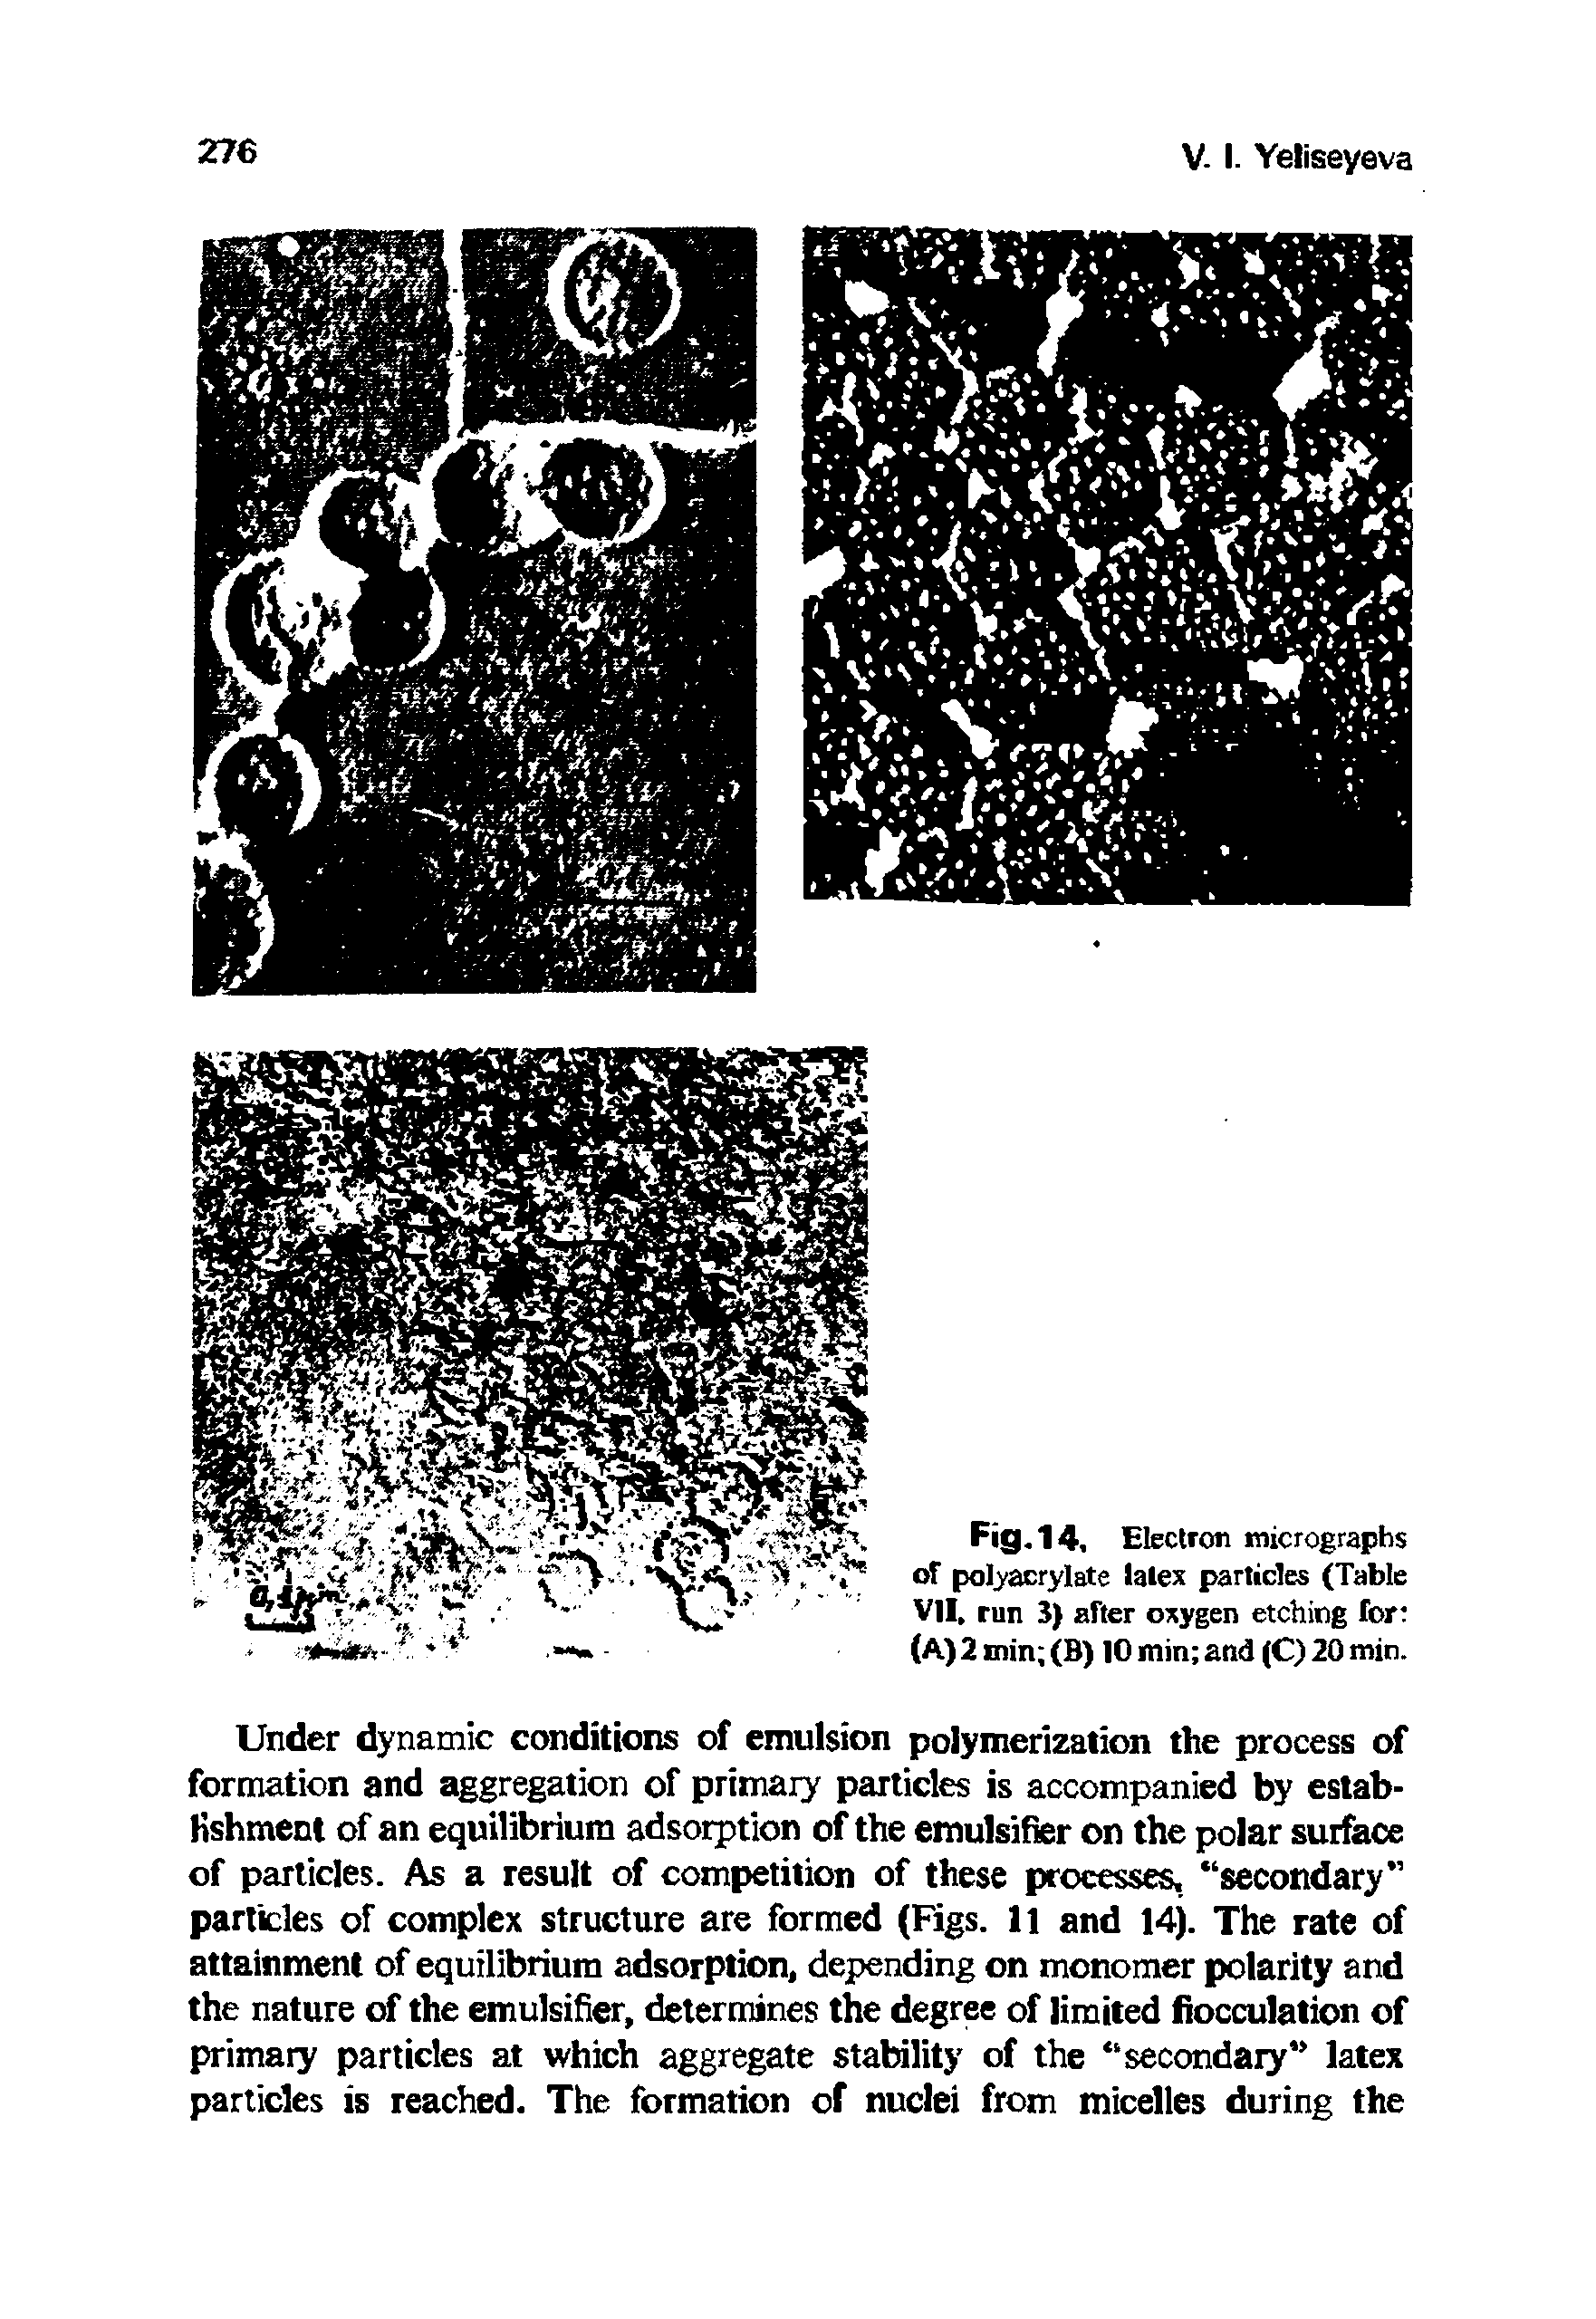 Fig.14. Electron micrographs of pol acrylate latex particles (Table VII. run 3) after oxygen etching for (A) 2 min (B) 10 min and (C) 20 min.